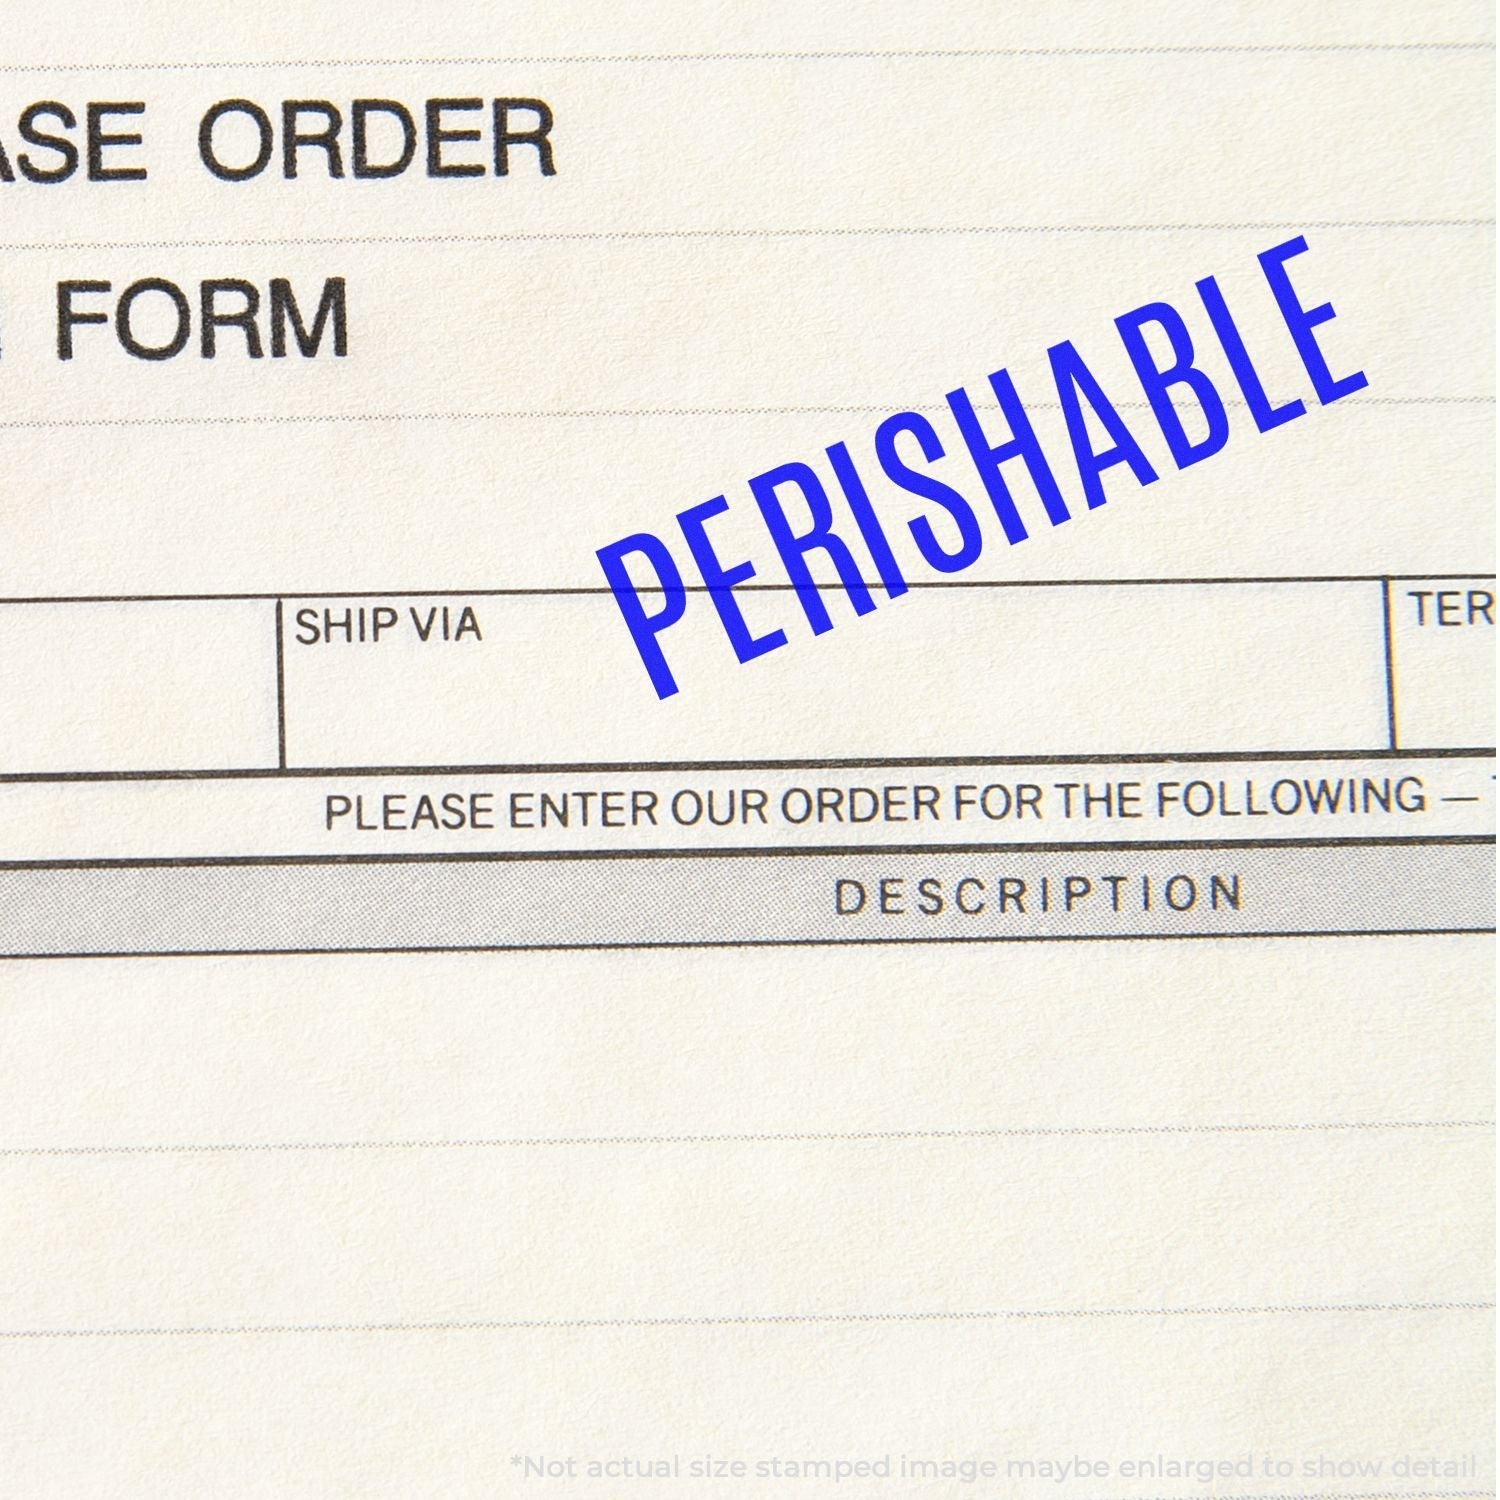 A self-inking stamp with a stamped image showing how the text "PERISHABLE" is displayed after stamping.